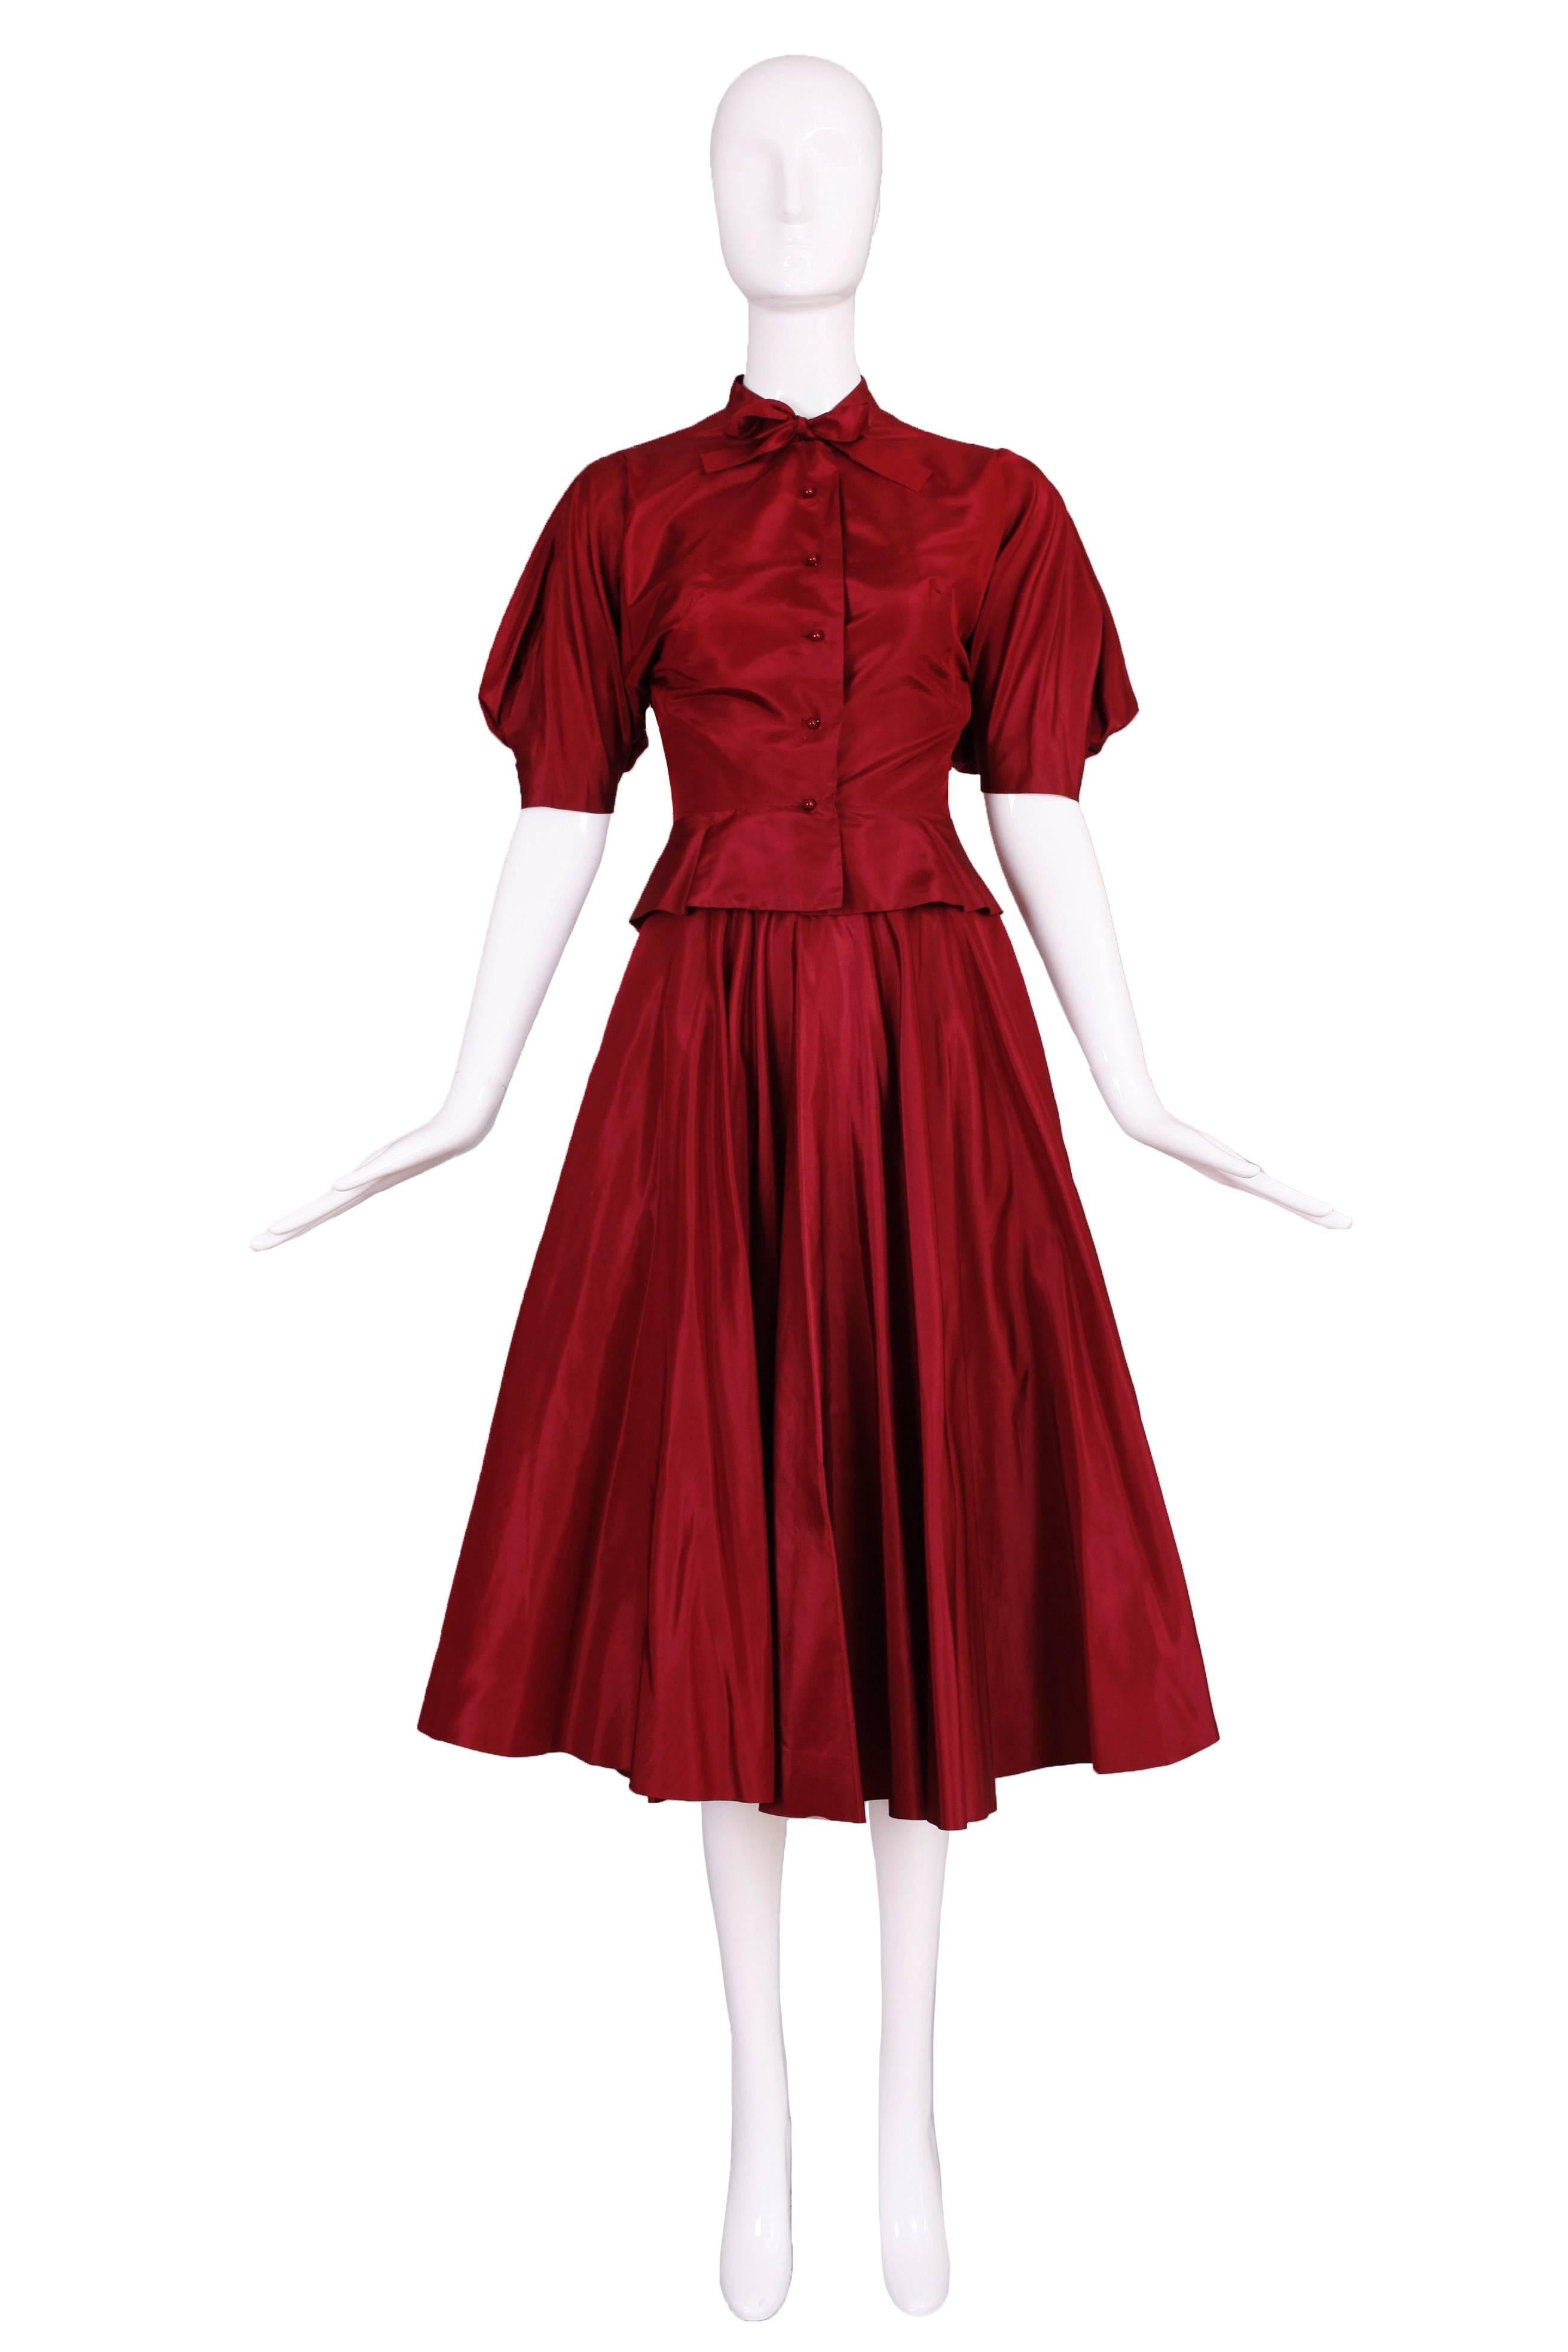 A 1981 Madame Gres haute couture dark scarlet silk taffeta skirt and blouse ensemble with matching high-heeled shoes size 6 1/2. Features the iconic Mme Gres gathered/balloon sleeve, shiny round button closures down center front, neck ties and a